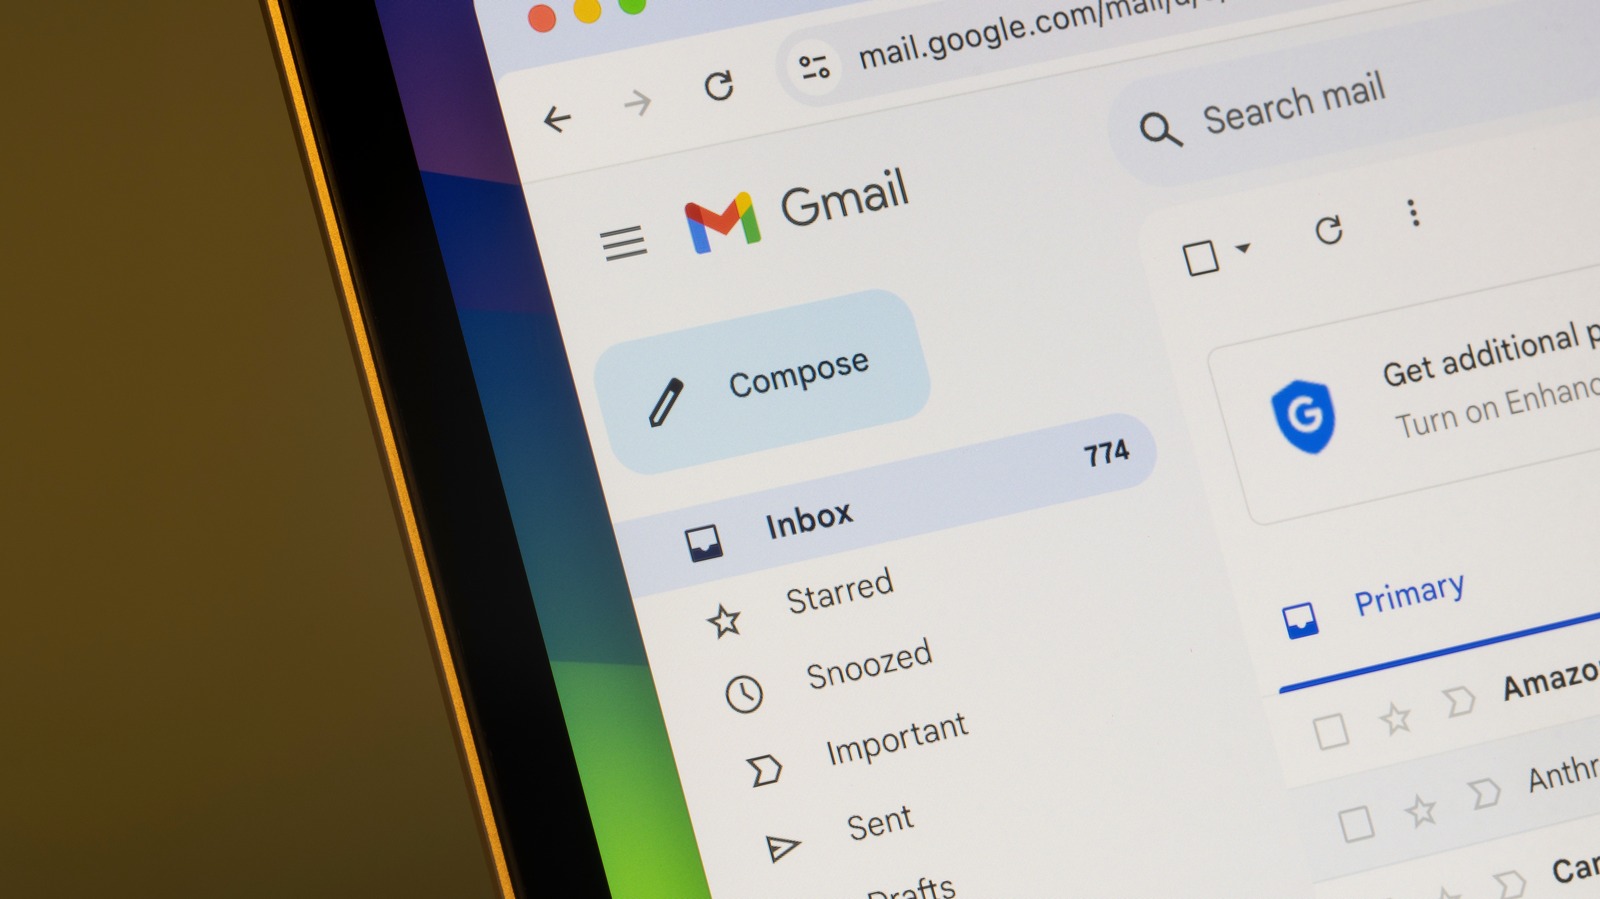 How To Recover Deleted Emails From Gmail (Even If You've Emptied Trash)